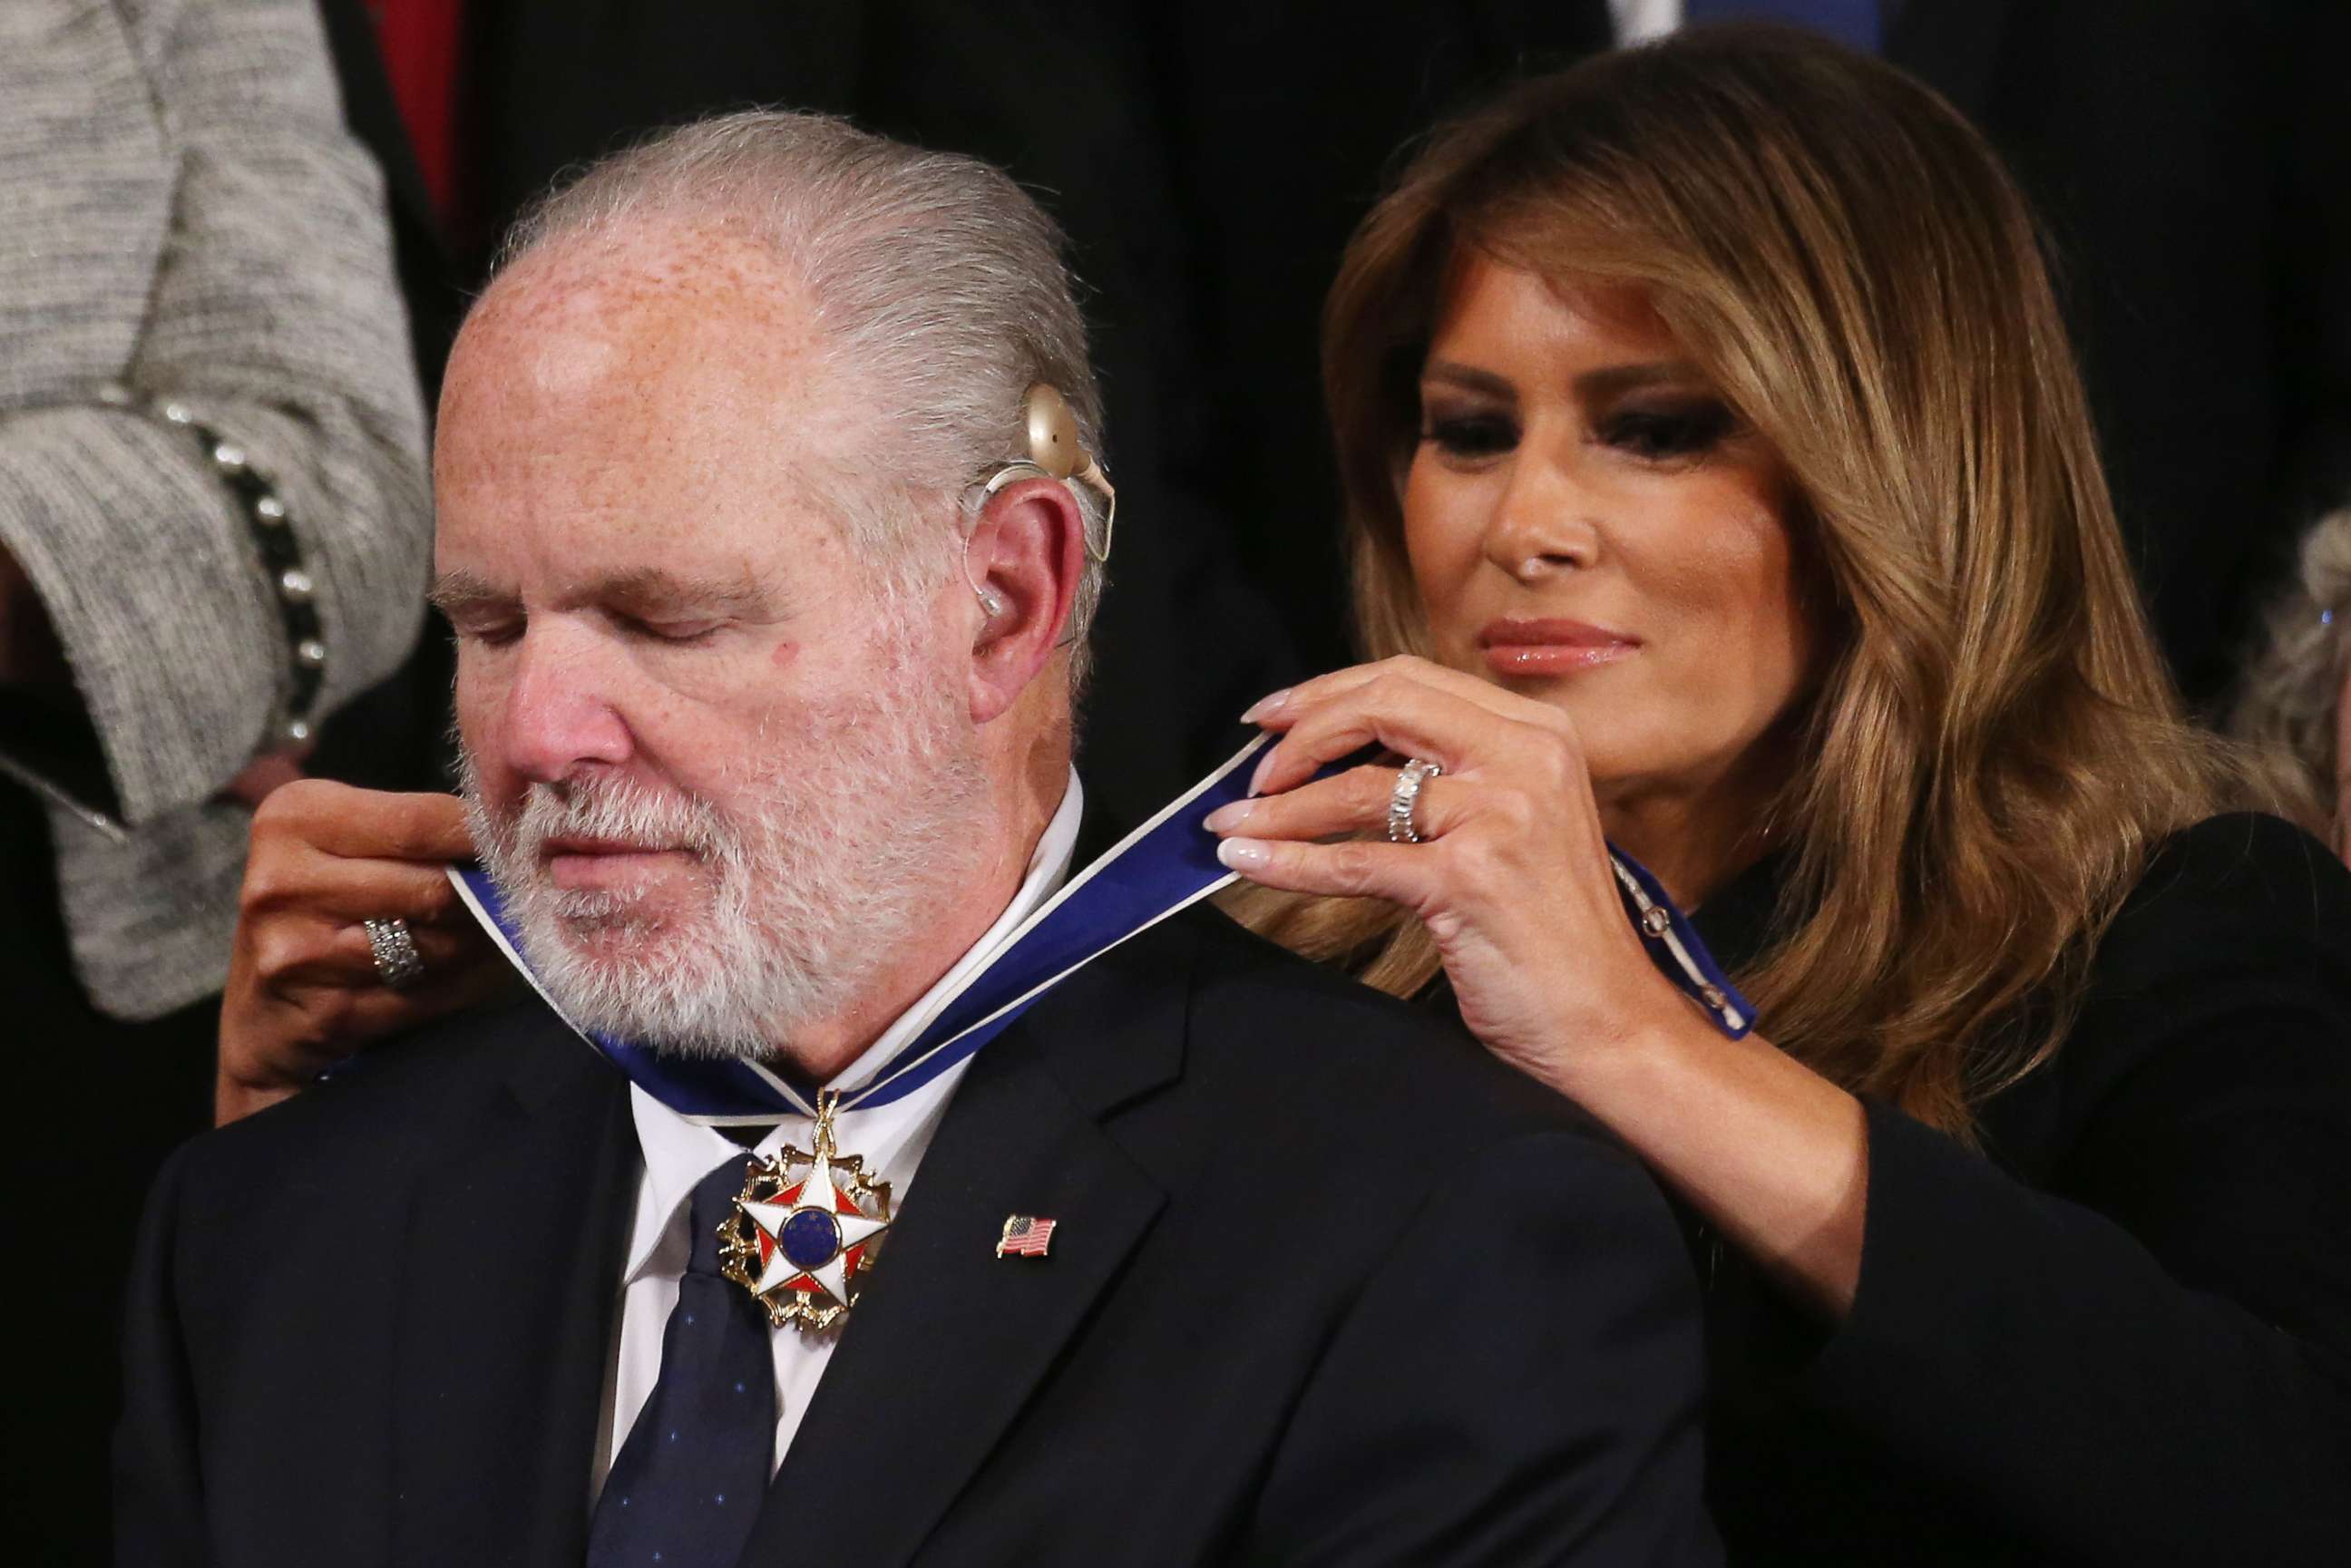 PHOTO: Radio personality Rush Limbaugh reacts as First Lady Melania Trump gives him the Presidential Medal of Freedom during the State of the Union address in the chamber of the U.S. House of Representatives on February 04, 2020 in Washington, DC.